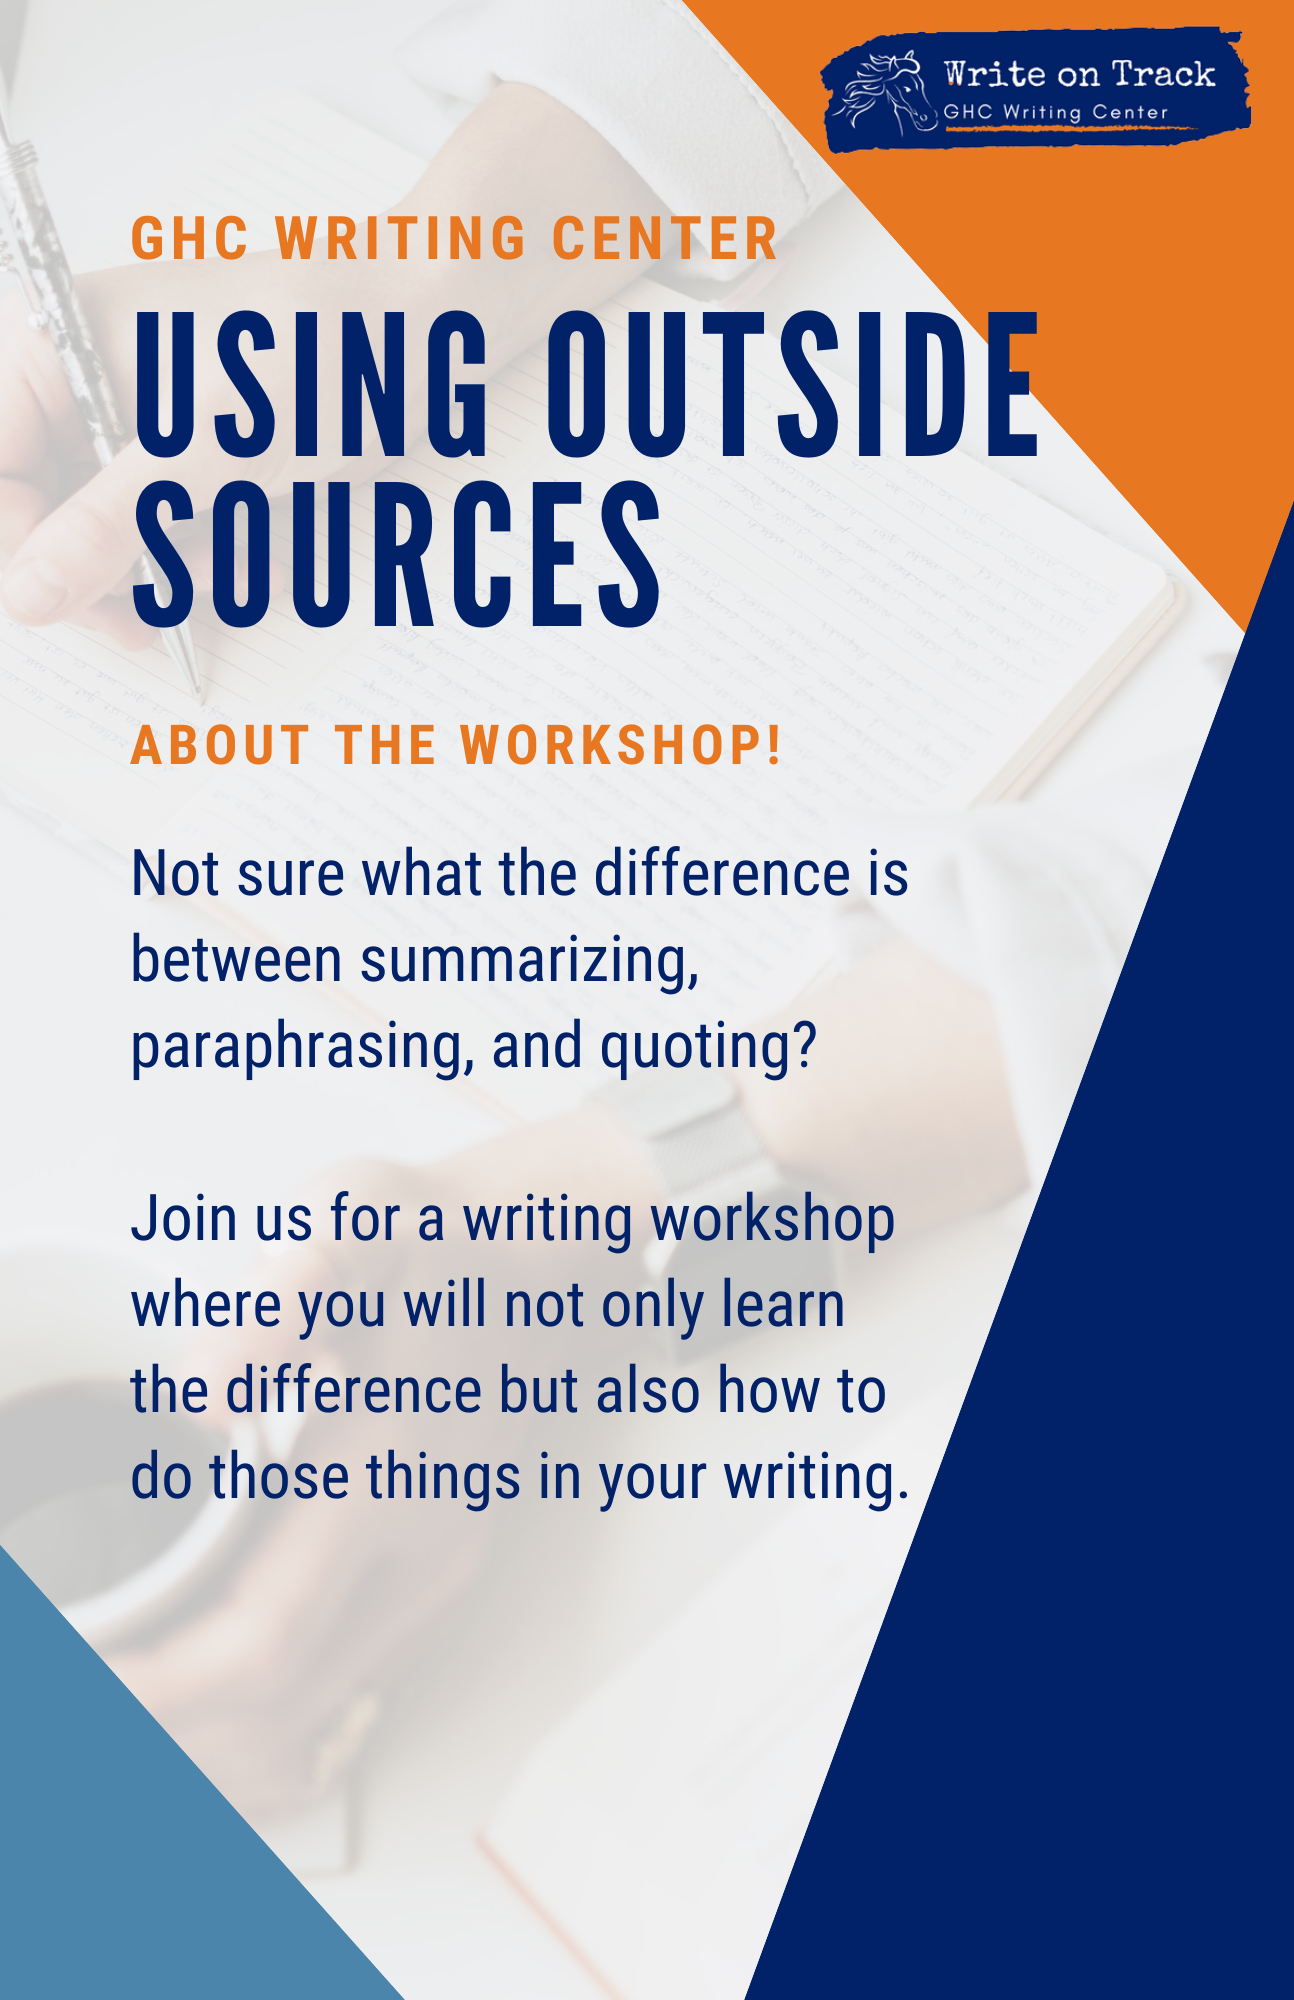 Flyer with orange, dark blue, and light blue accents. Overlapped on an image of a hand using a pen to write. Text reads "GHC Writing Center Using Outside Sources About the Workshop! Not sure what the difference is between summarizing, paraphrasing, and quoting? Join us for a writing workshop where you will not only learn the difference but also how to do those things in your writing."